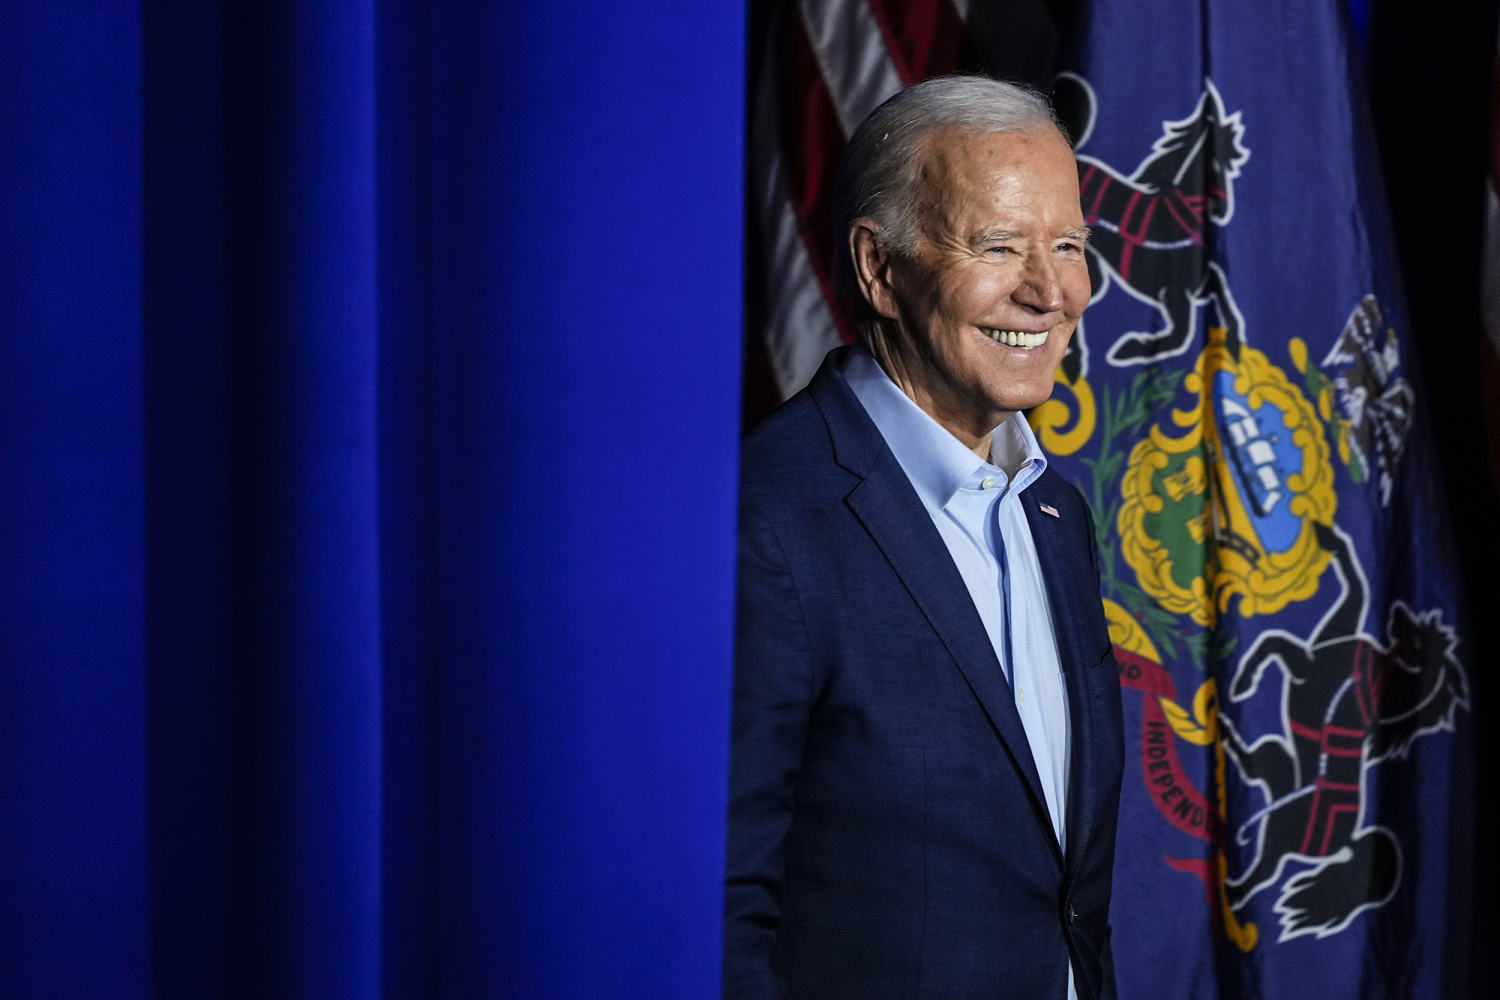 In private, Biden shifts from frustration to confidence that he'll beat Trump